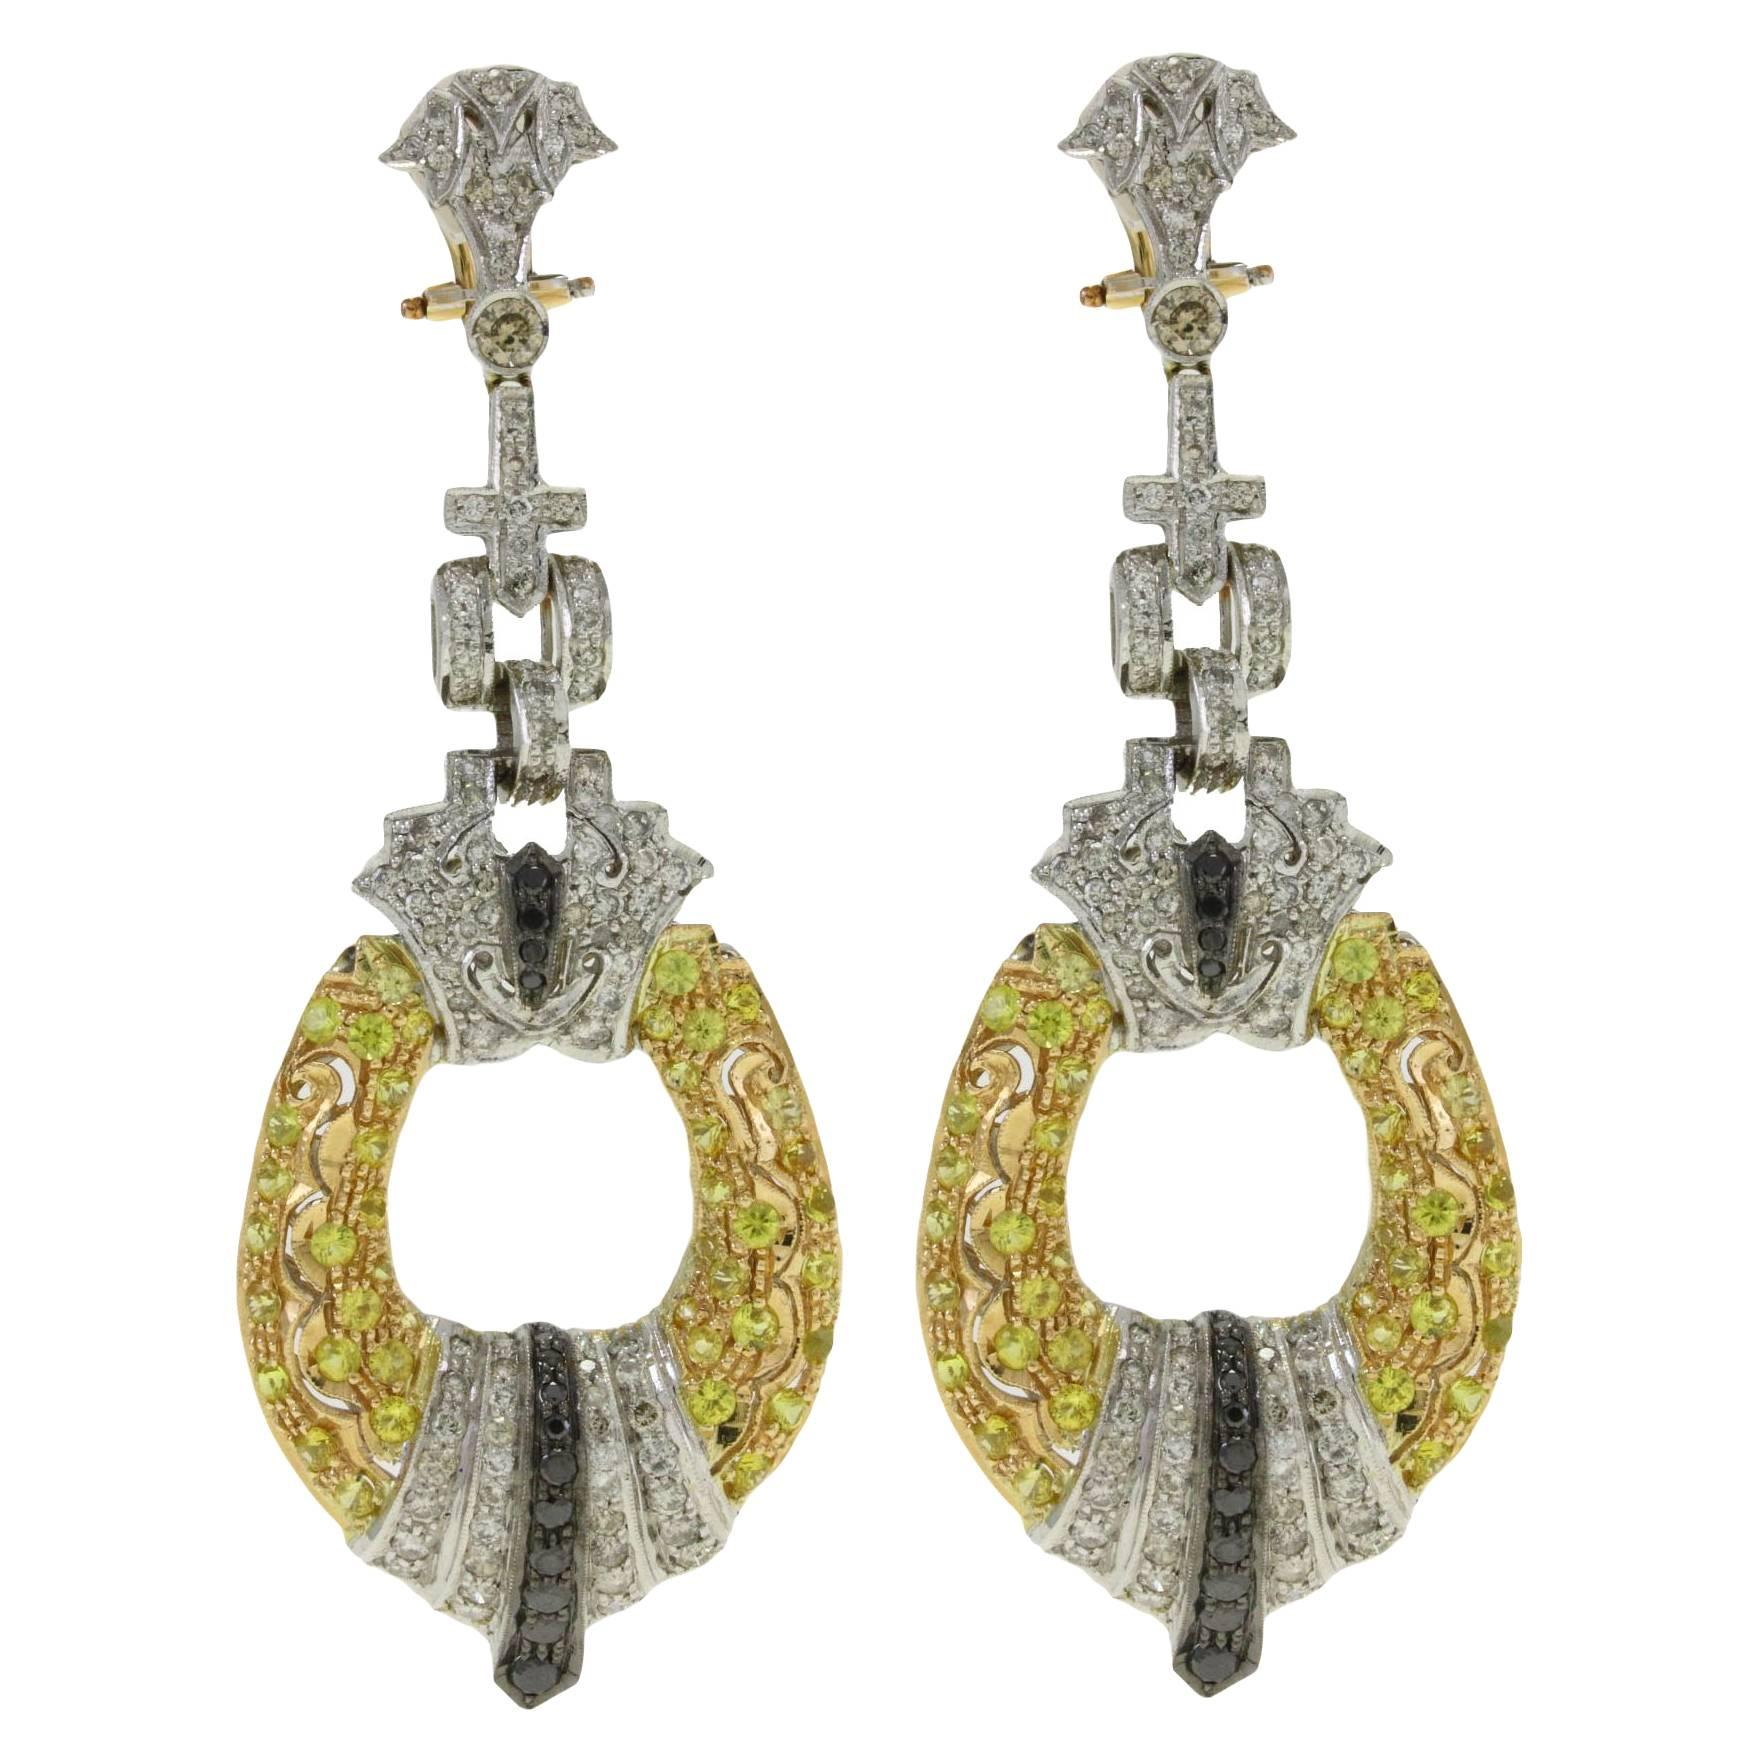 Black and White Diamond, Sapphire, White and Yellow Gold Chandelier Earrings